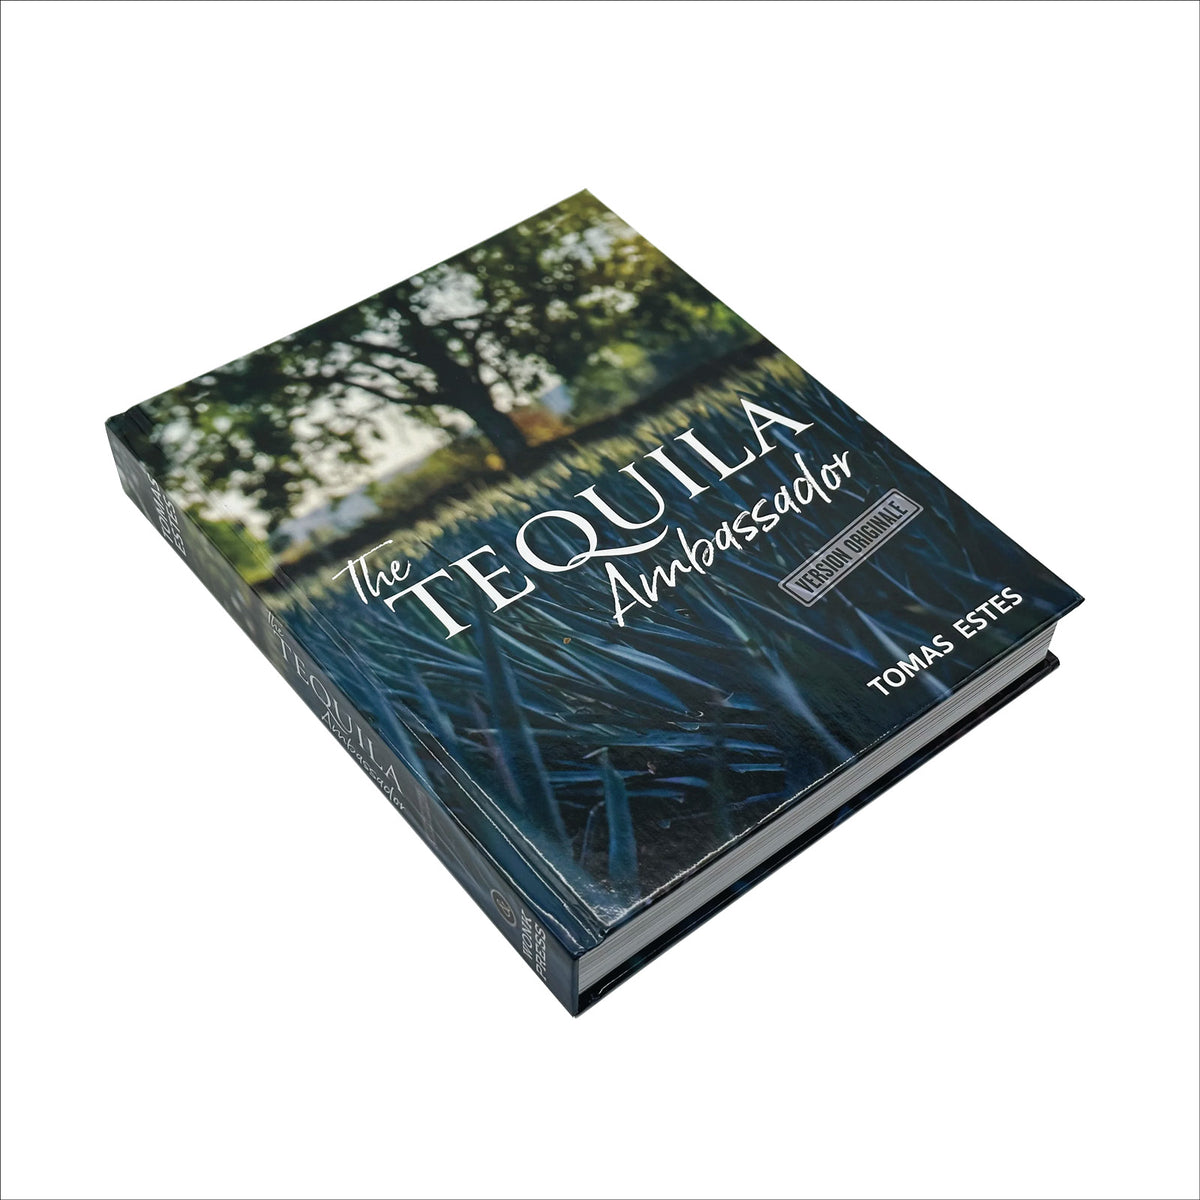 The Tequila ambassador book by Tomas Estes shown on a white background